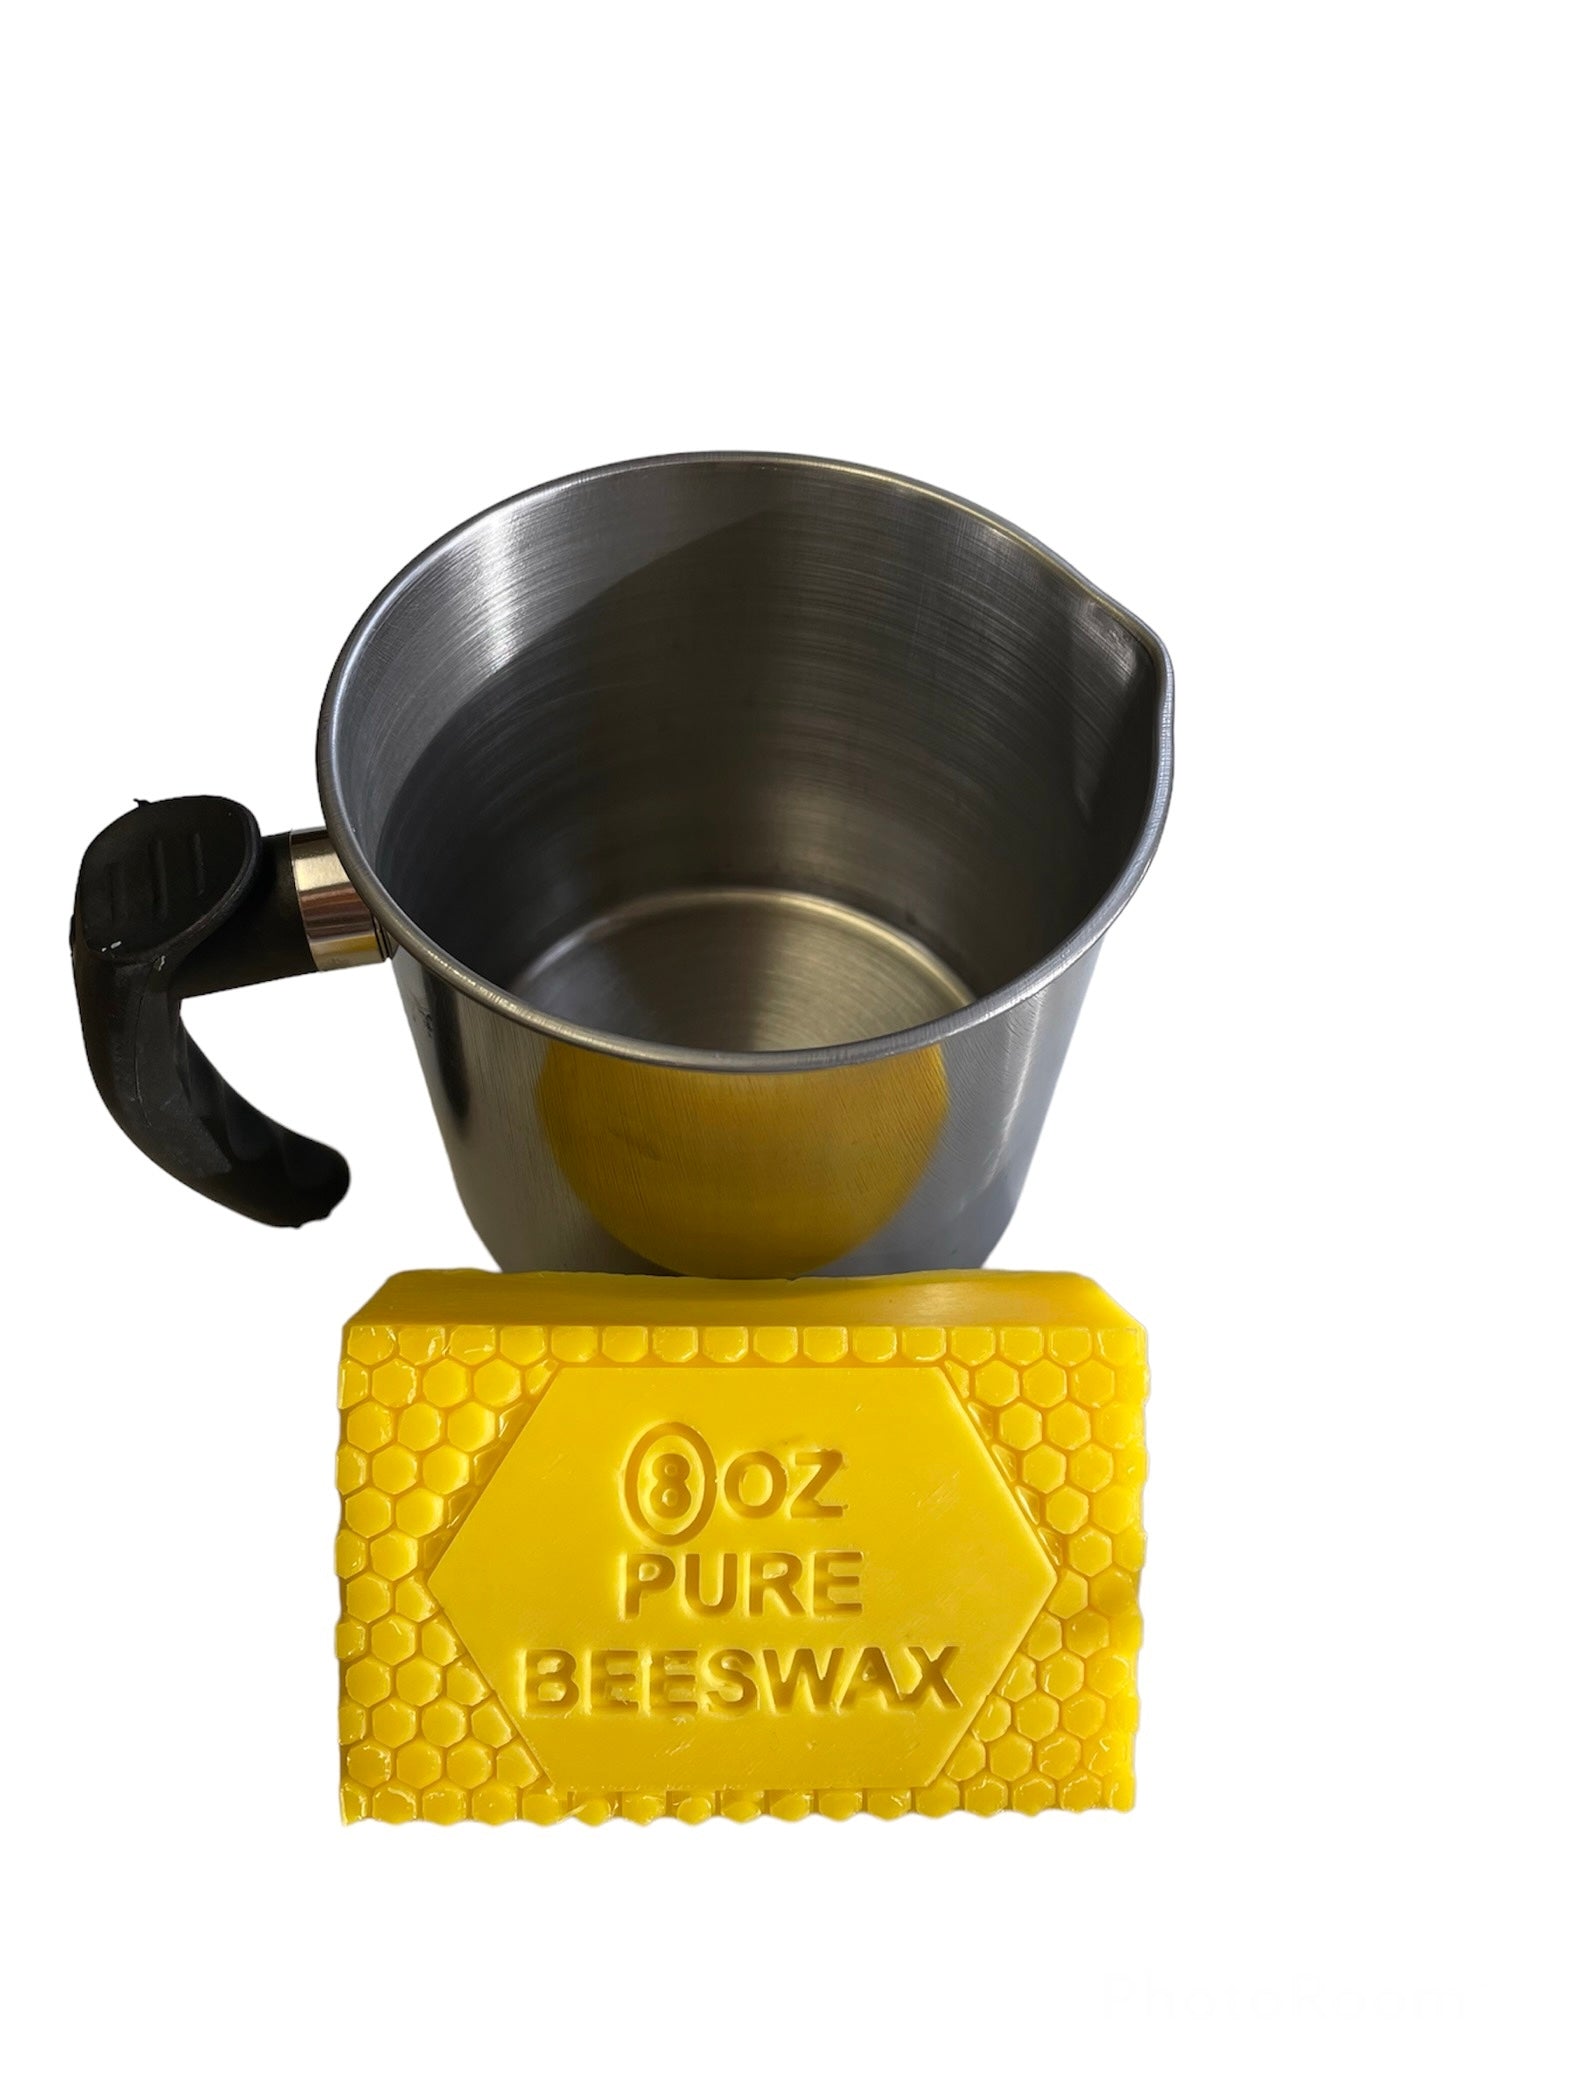 Stainless steel candle pouring pot with 100% pure beeswax – The Handmade  Charm